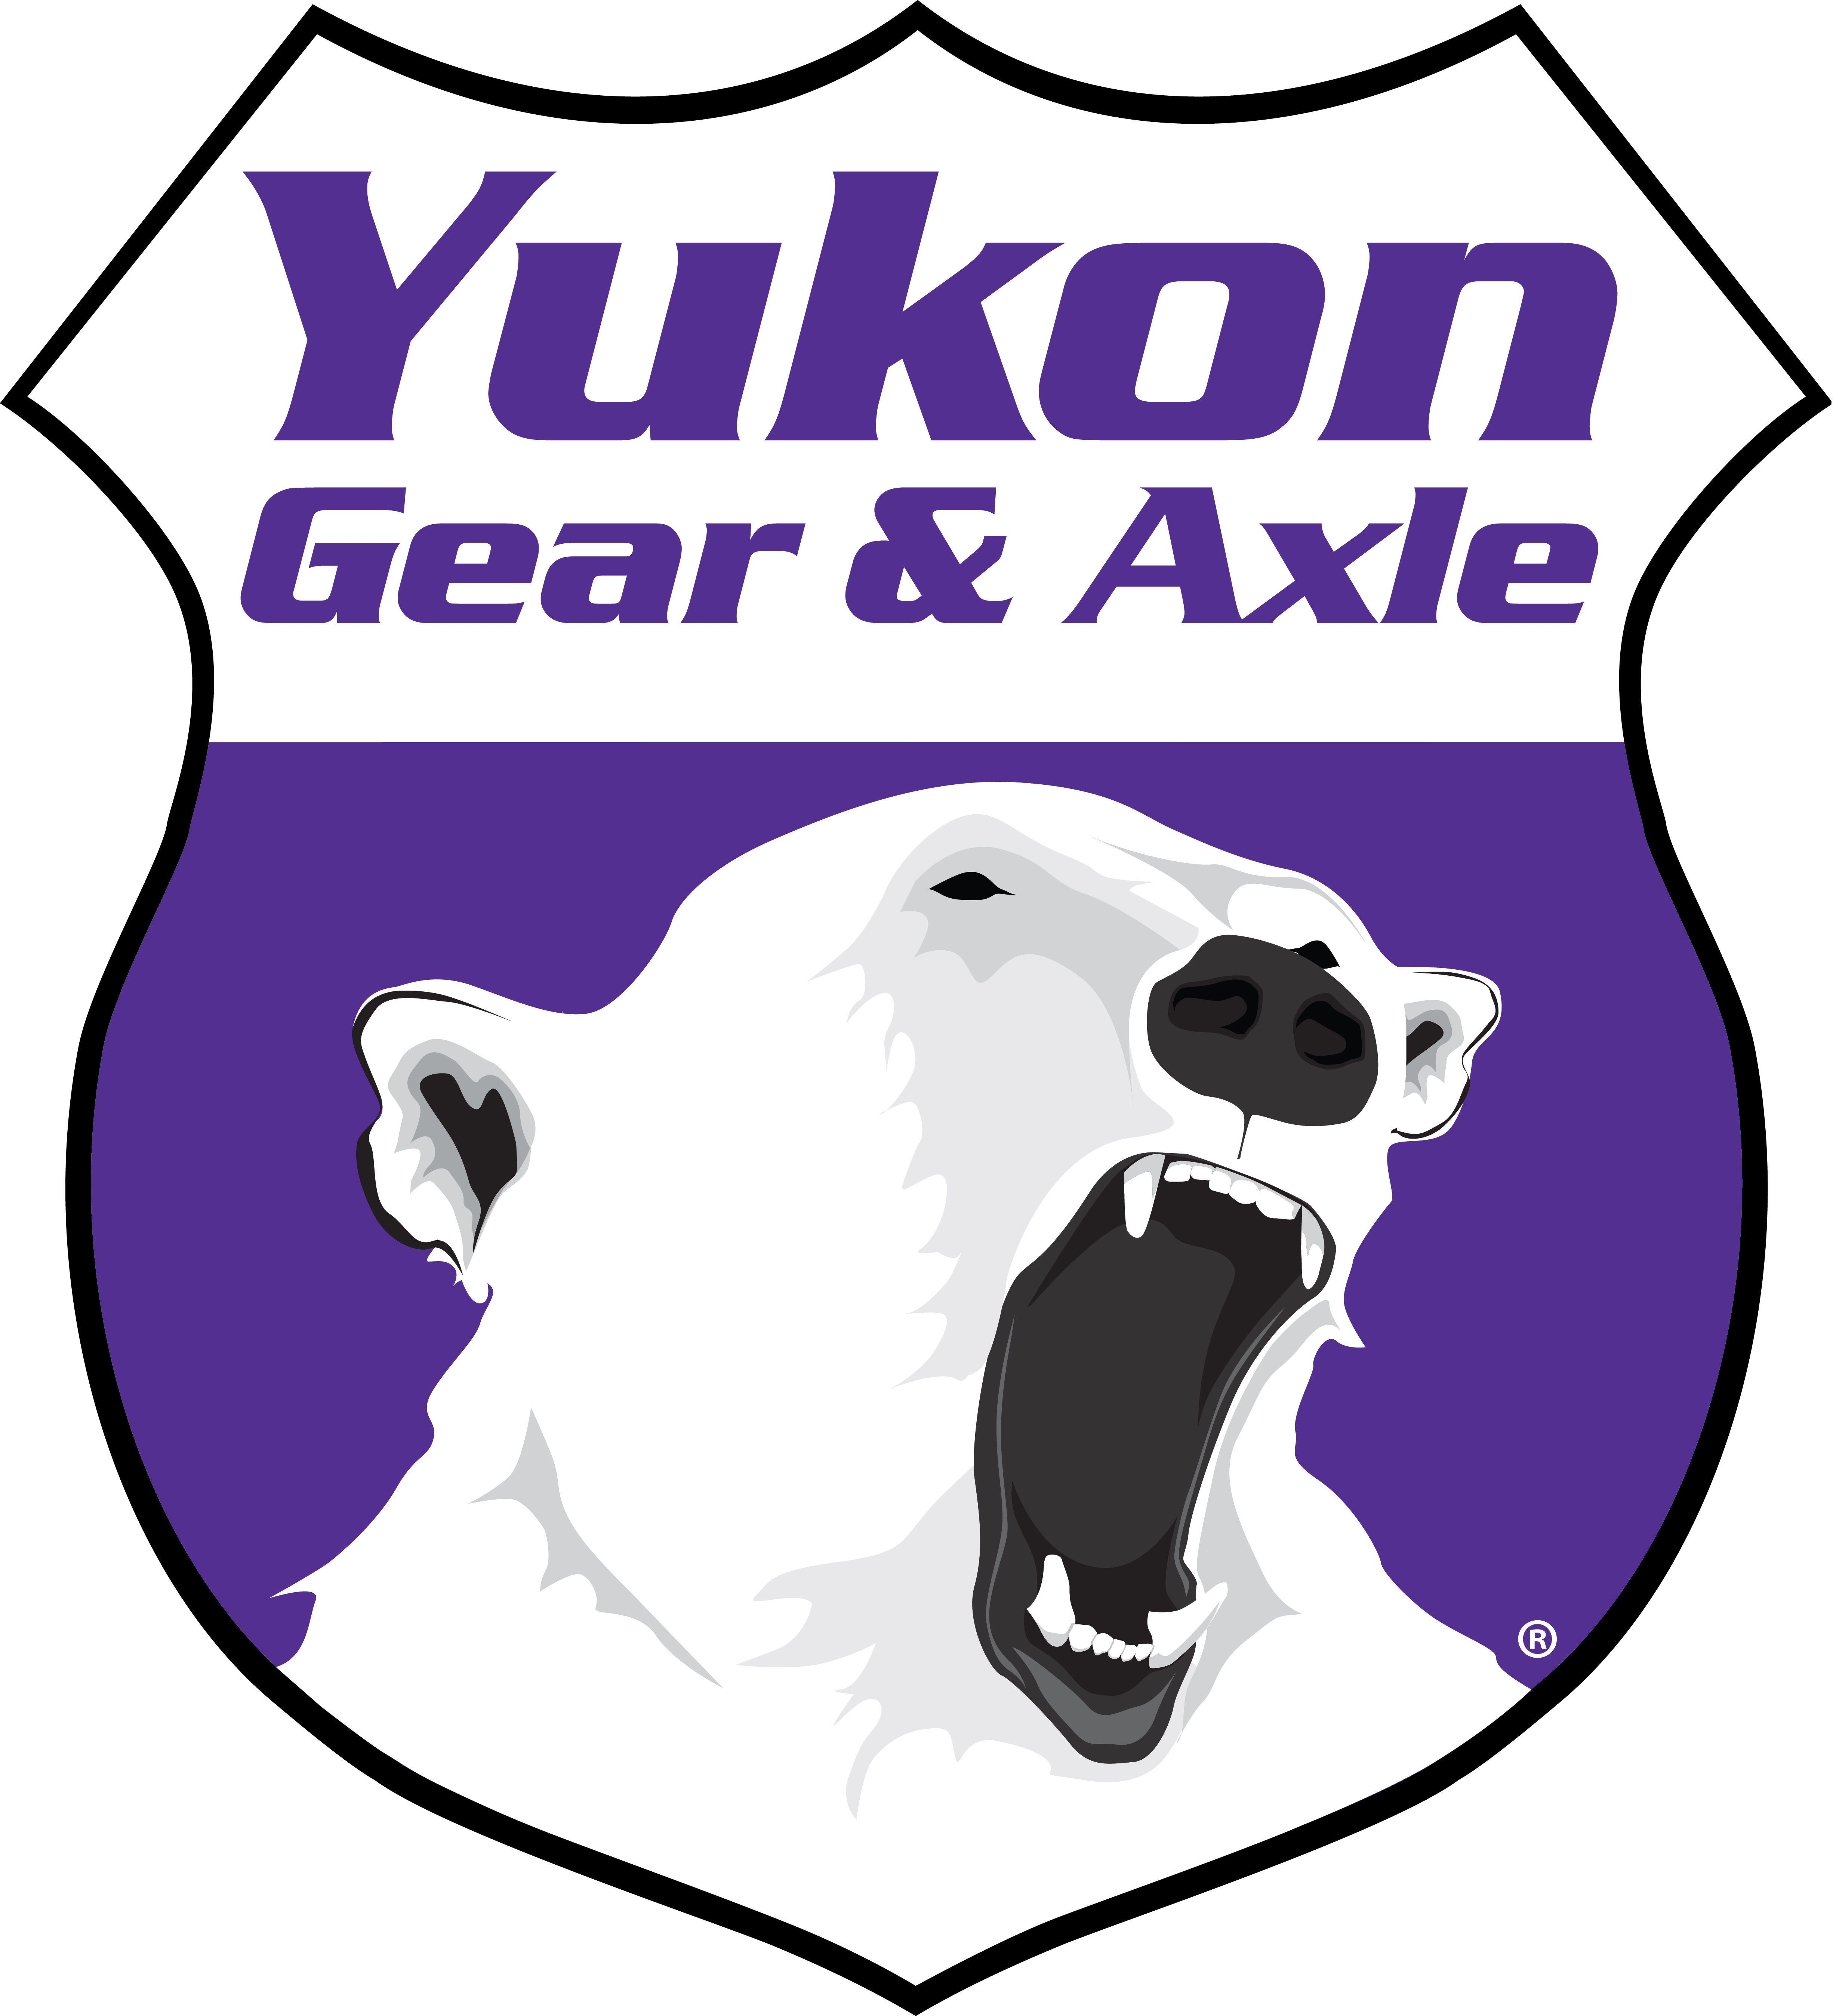 Yukon Minor install kit for Ford 8" differential 